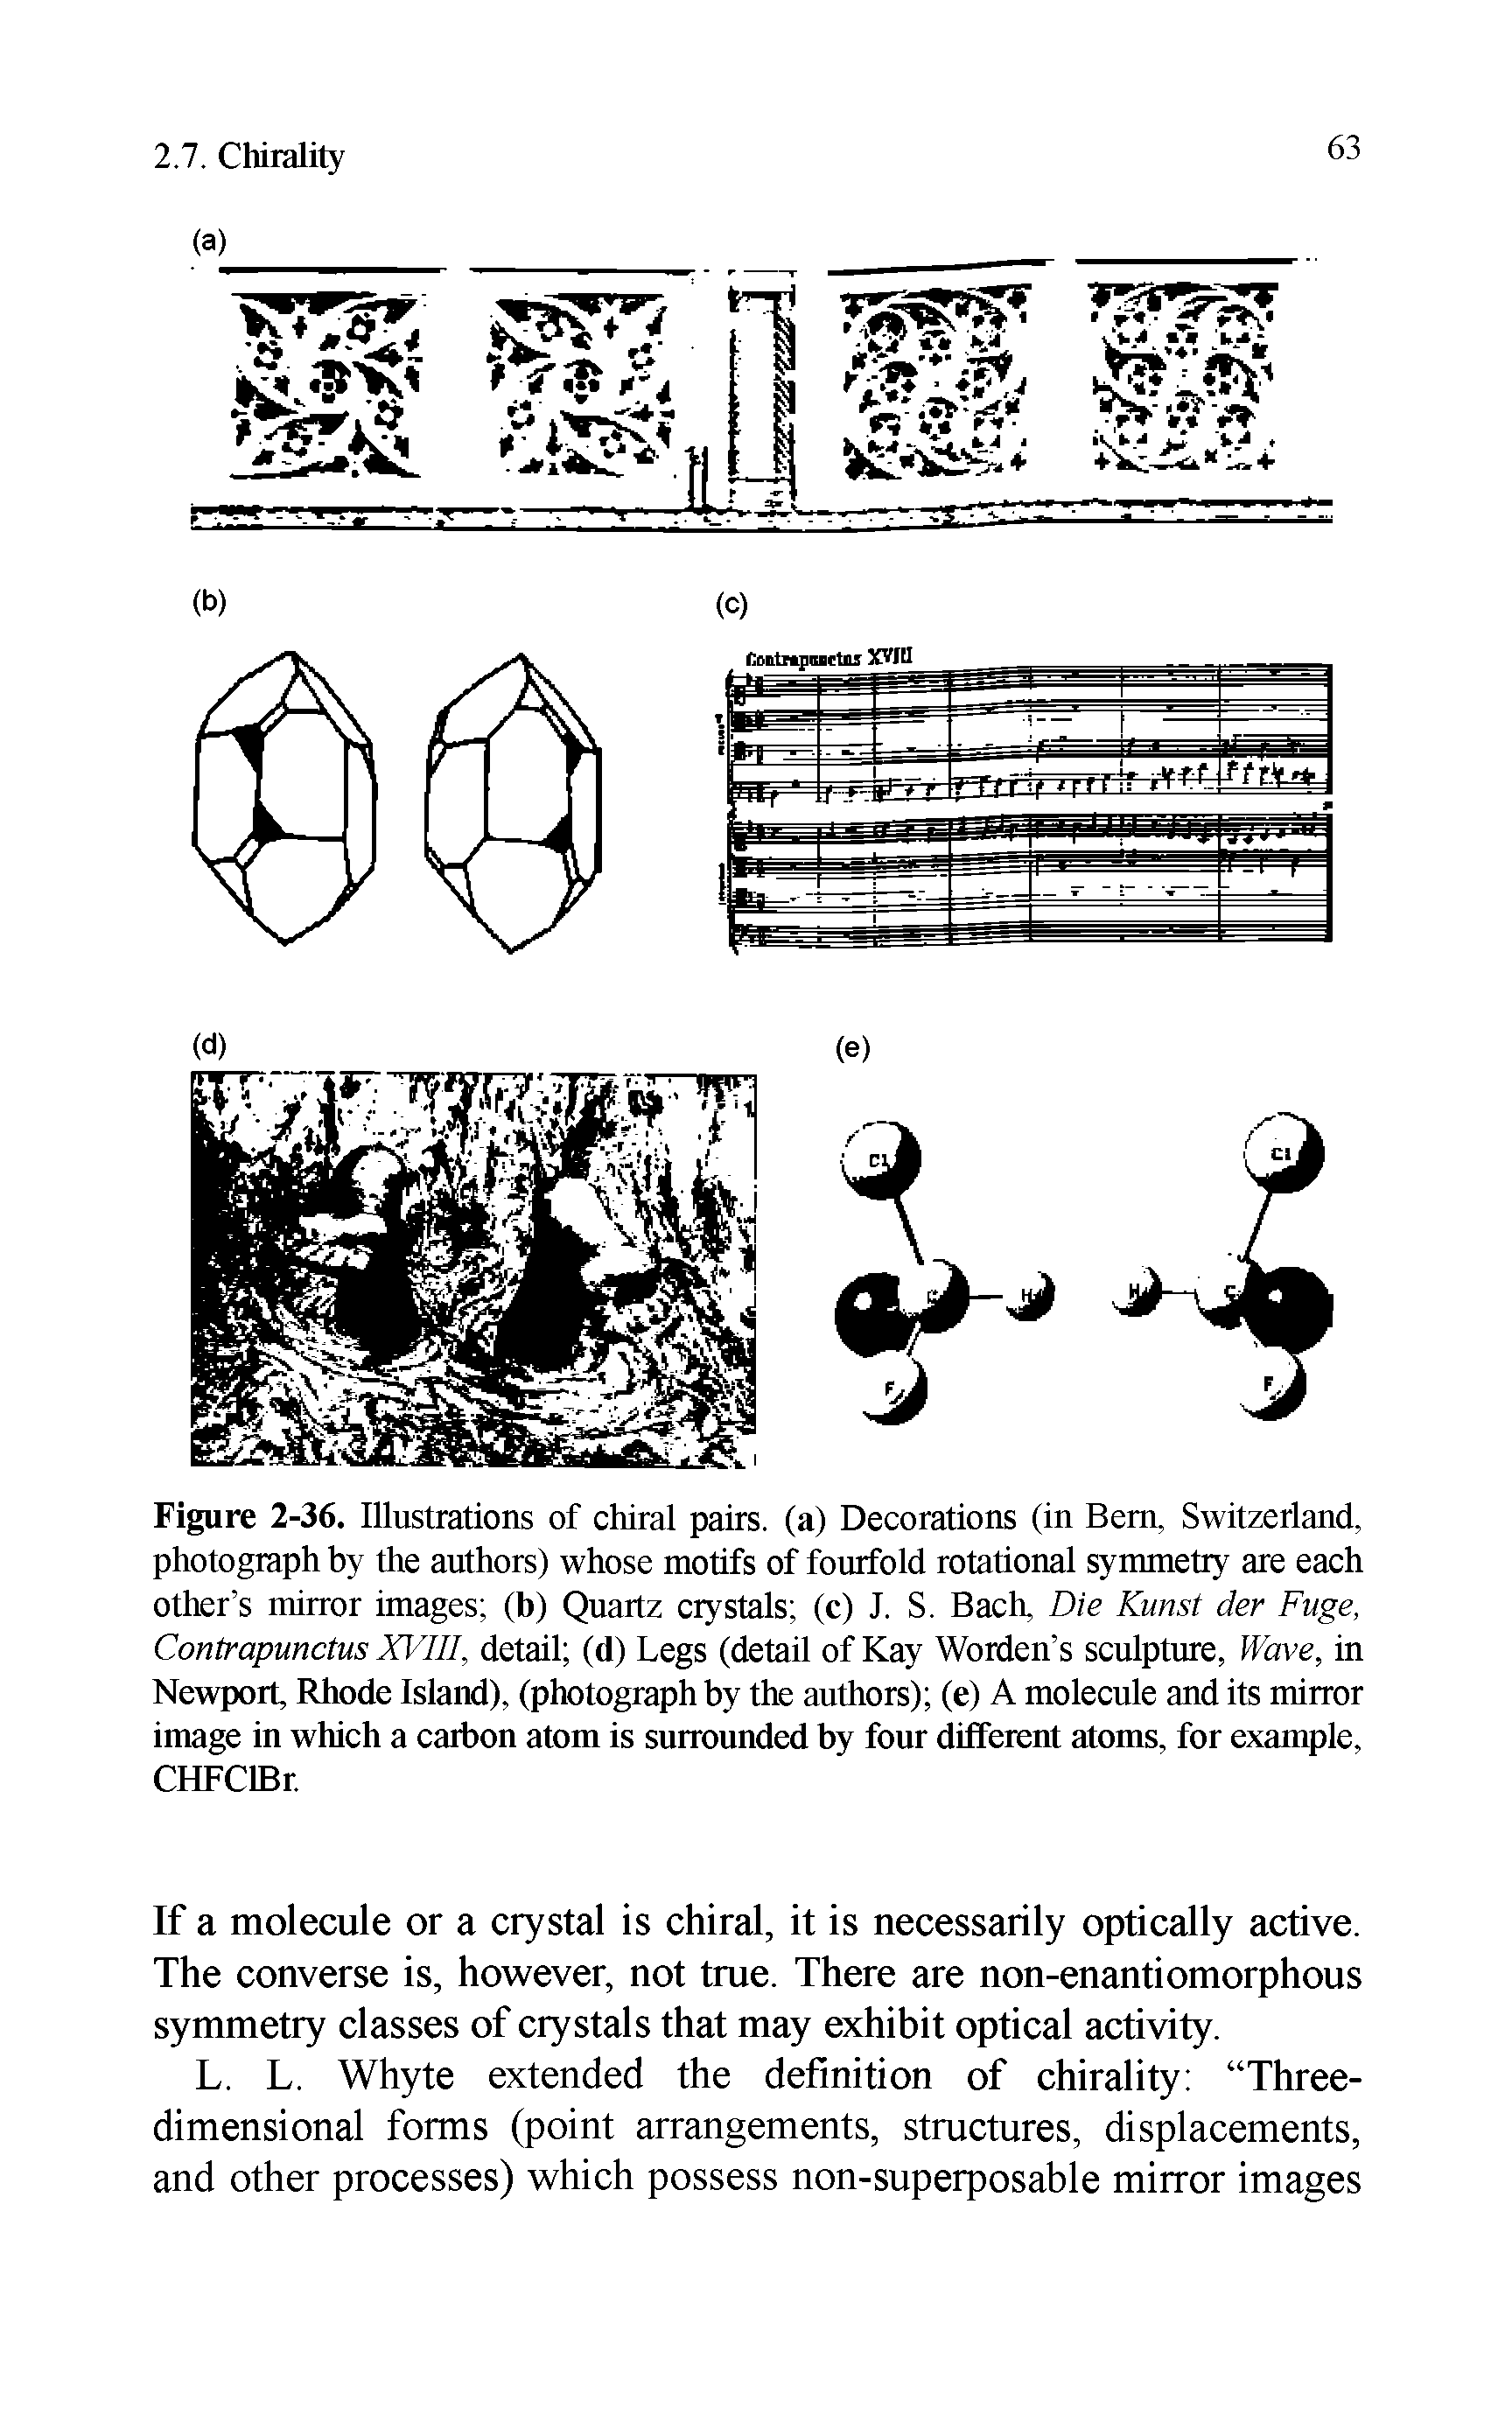 Figure 2-36. Illustrations of chiral pairs, (a) Decorations (in Bern, Switzerland, photograph by the authors) whose motifs of fourfold rotational symmetry are each other s mirror images (b) Quartz crystals (c) J. S. Bach, Die Kunst der Fuge, Contrapunctus XVIII, detail (d) Legs (detail of Kay Worden s sculpture, Wave, in Newport, Rhode Island), (photograph by the authors) (e) A molecule and its mirror image in which a carbon atom is surrounded by four different atoms, for example, CHFClBr.